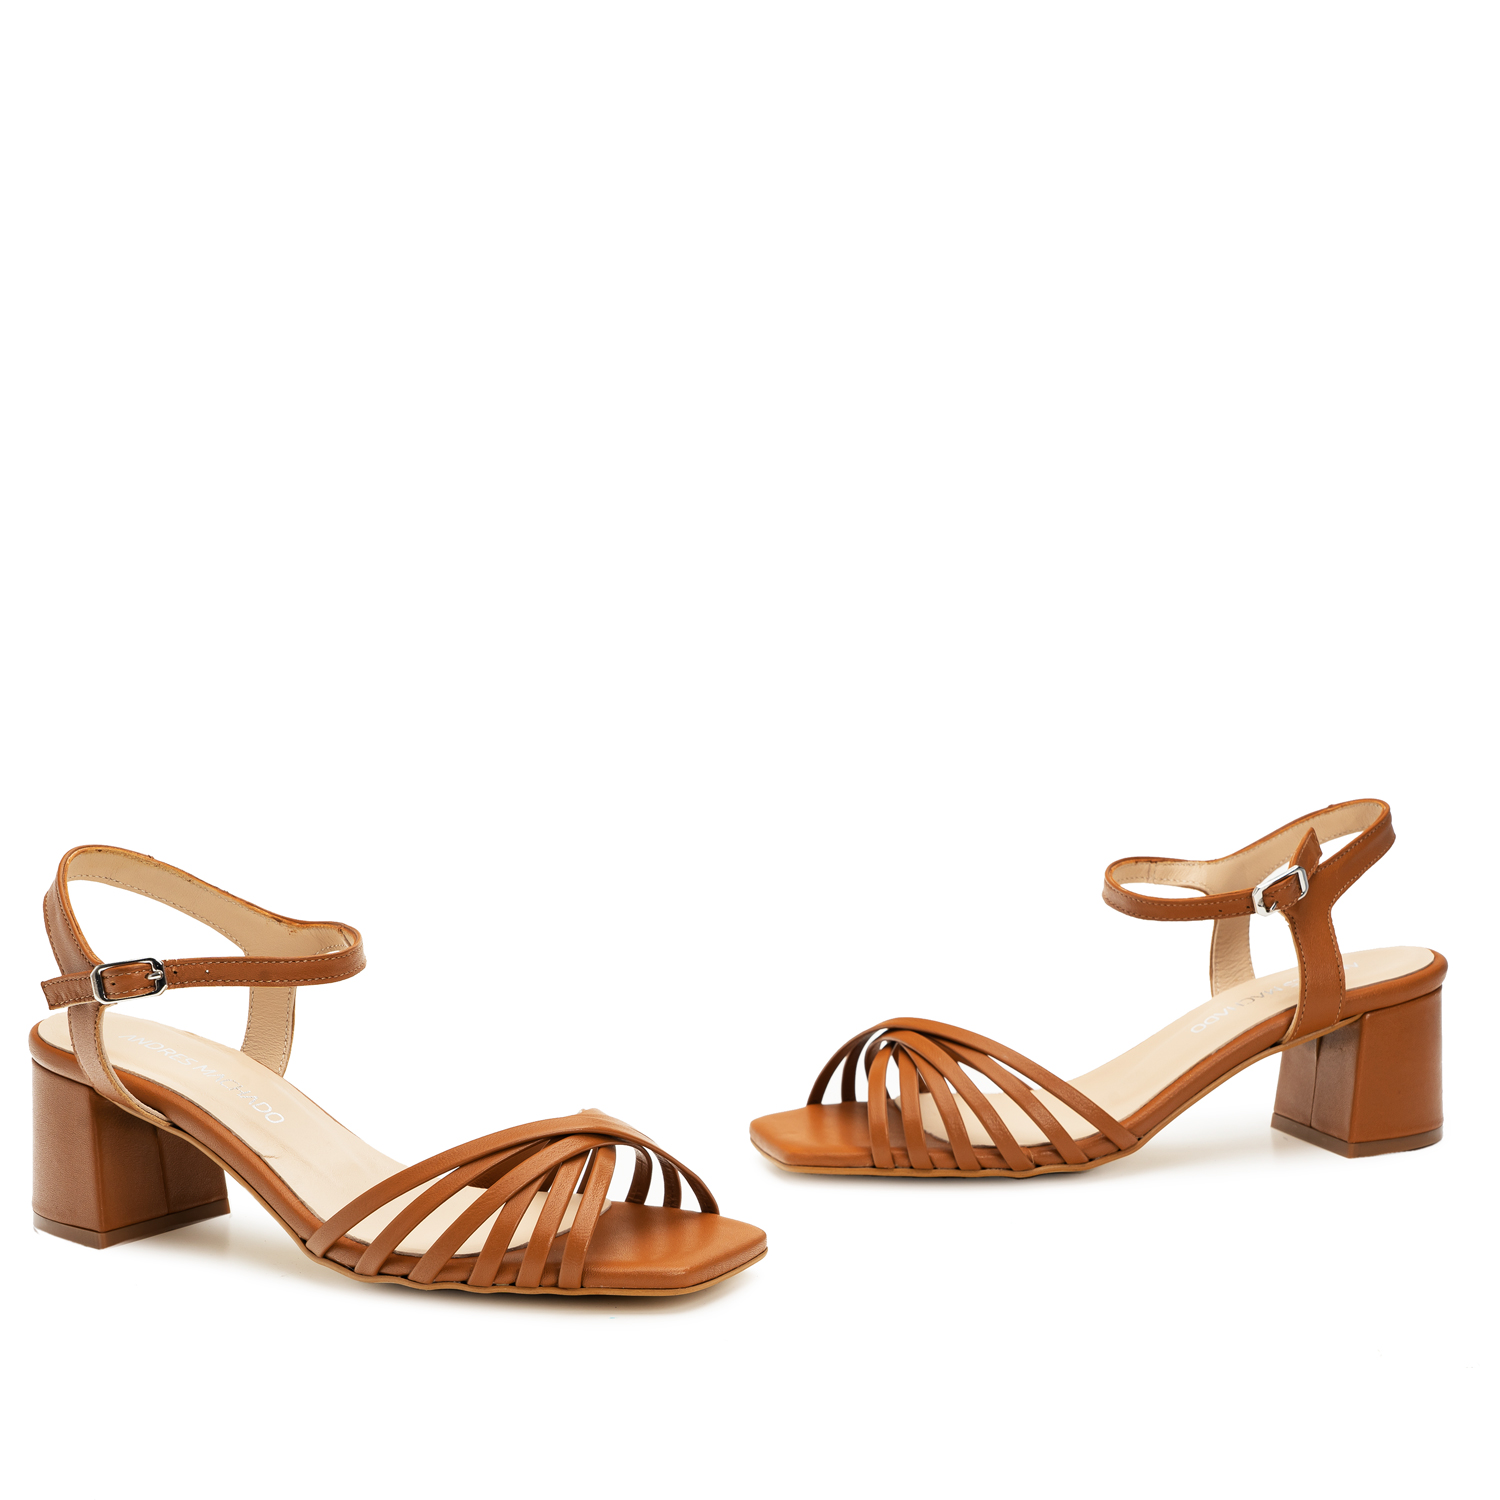 Strapped Sandals in Brown Leather 